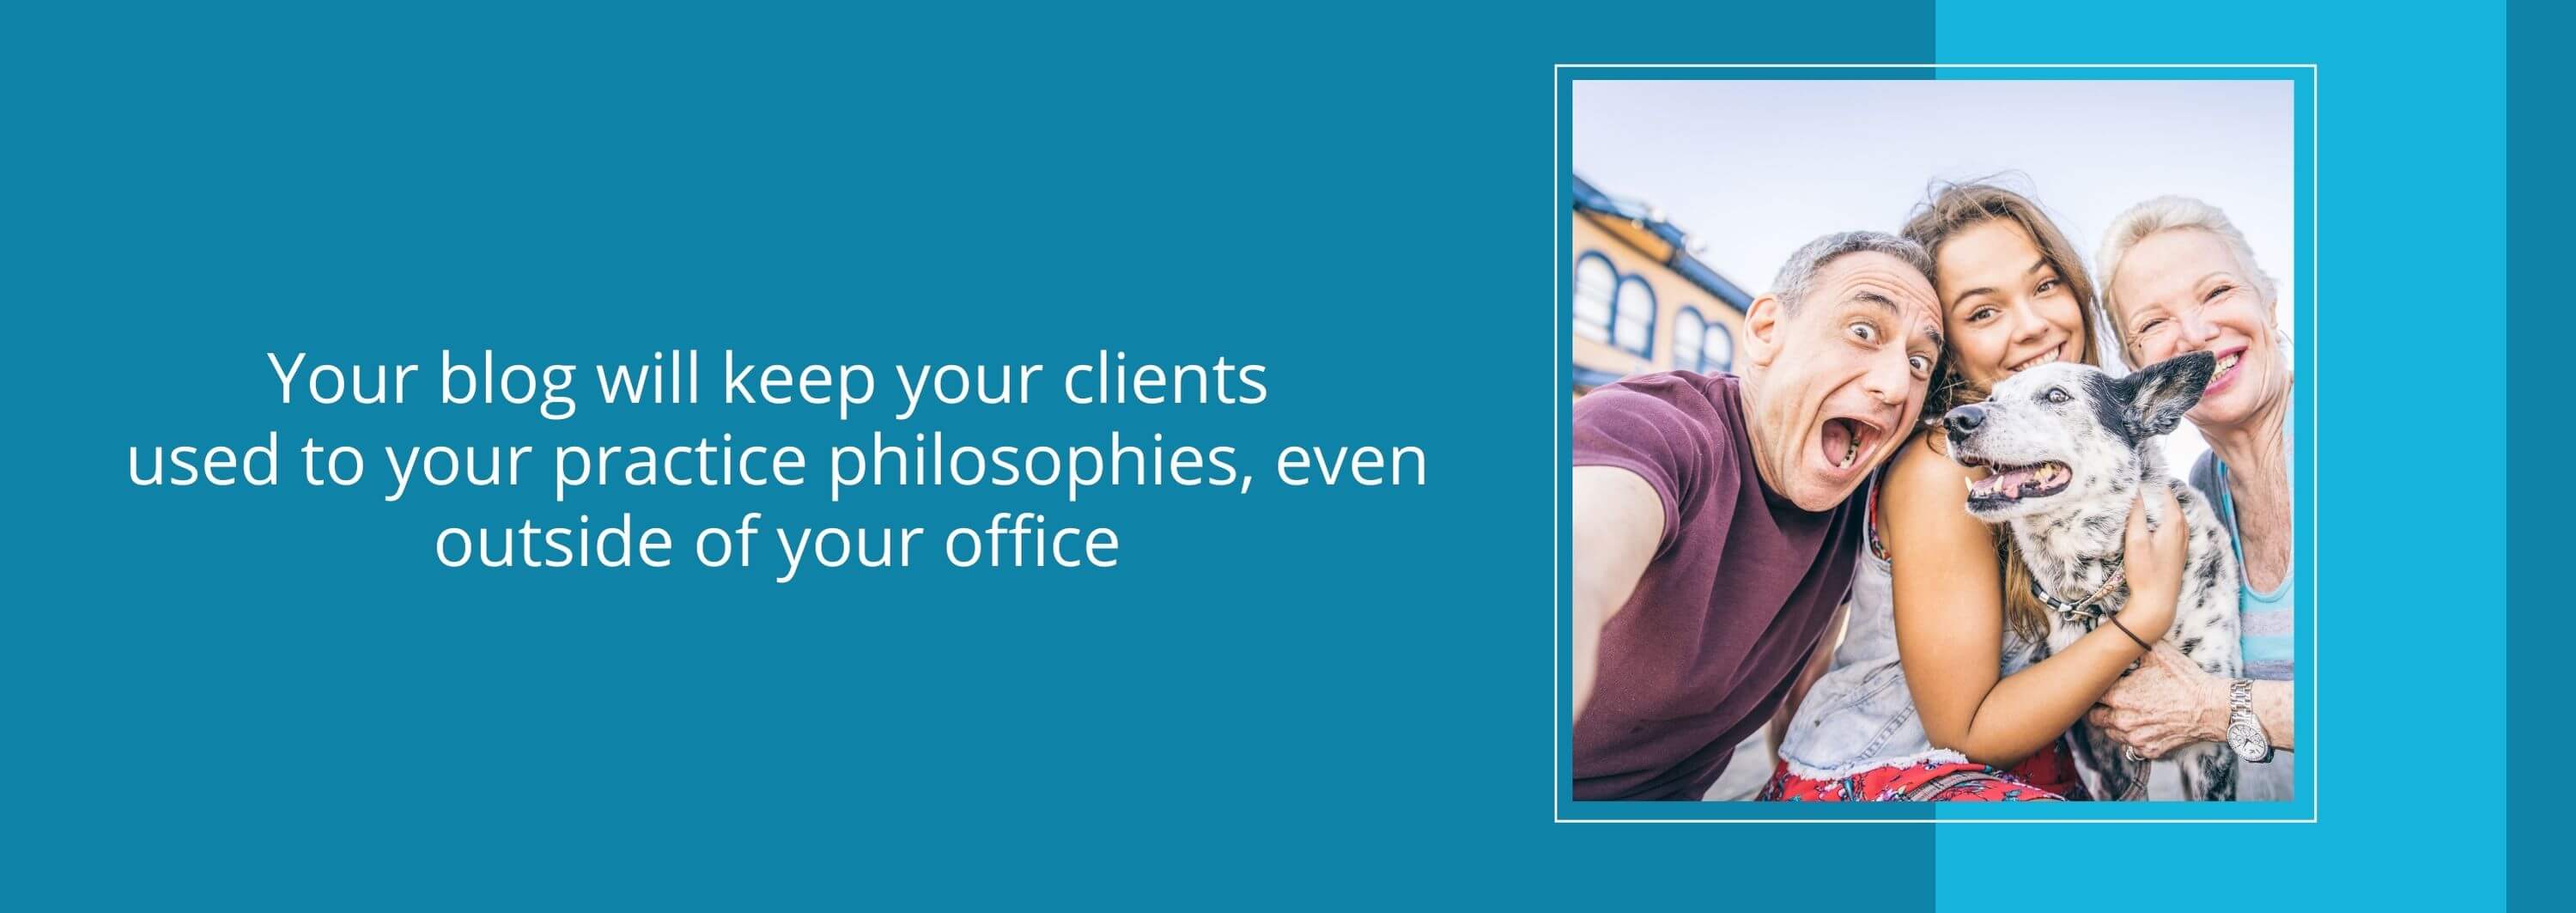 Your blog will keep your clients used to your practice philosophies, even outside of your office